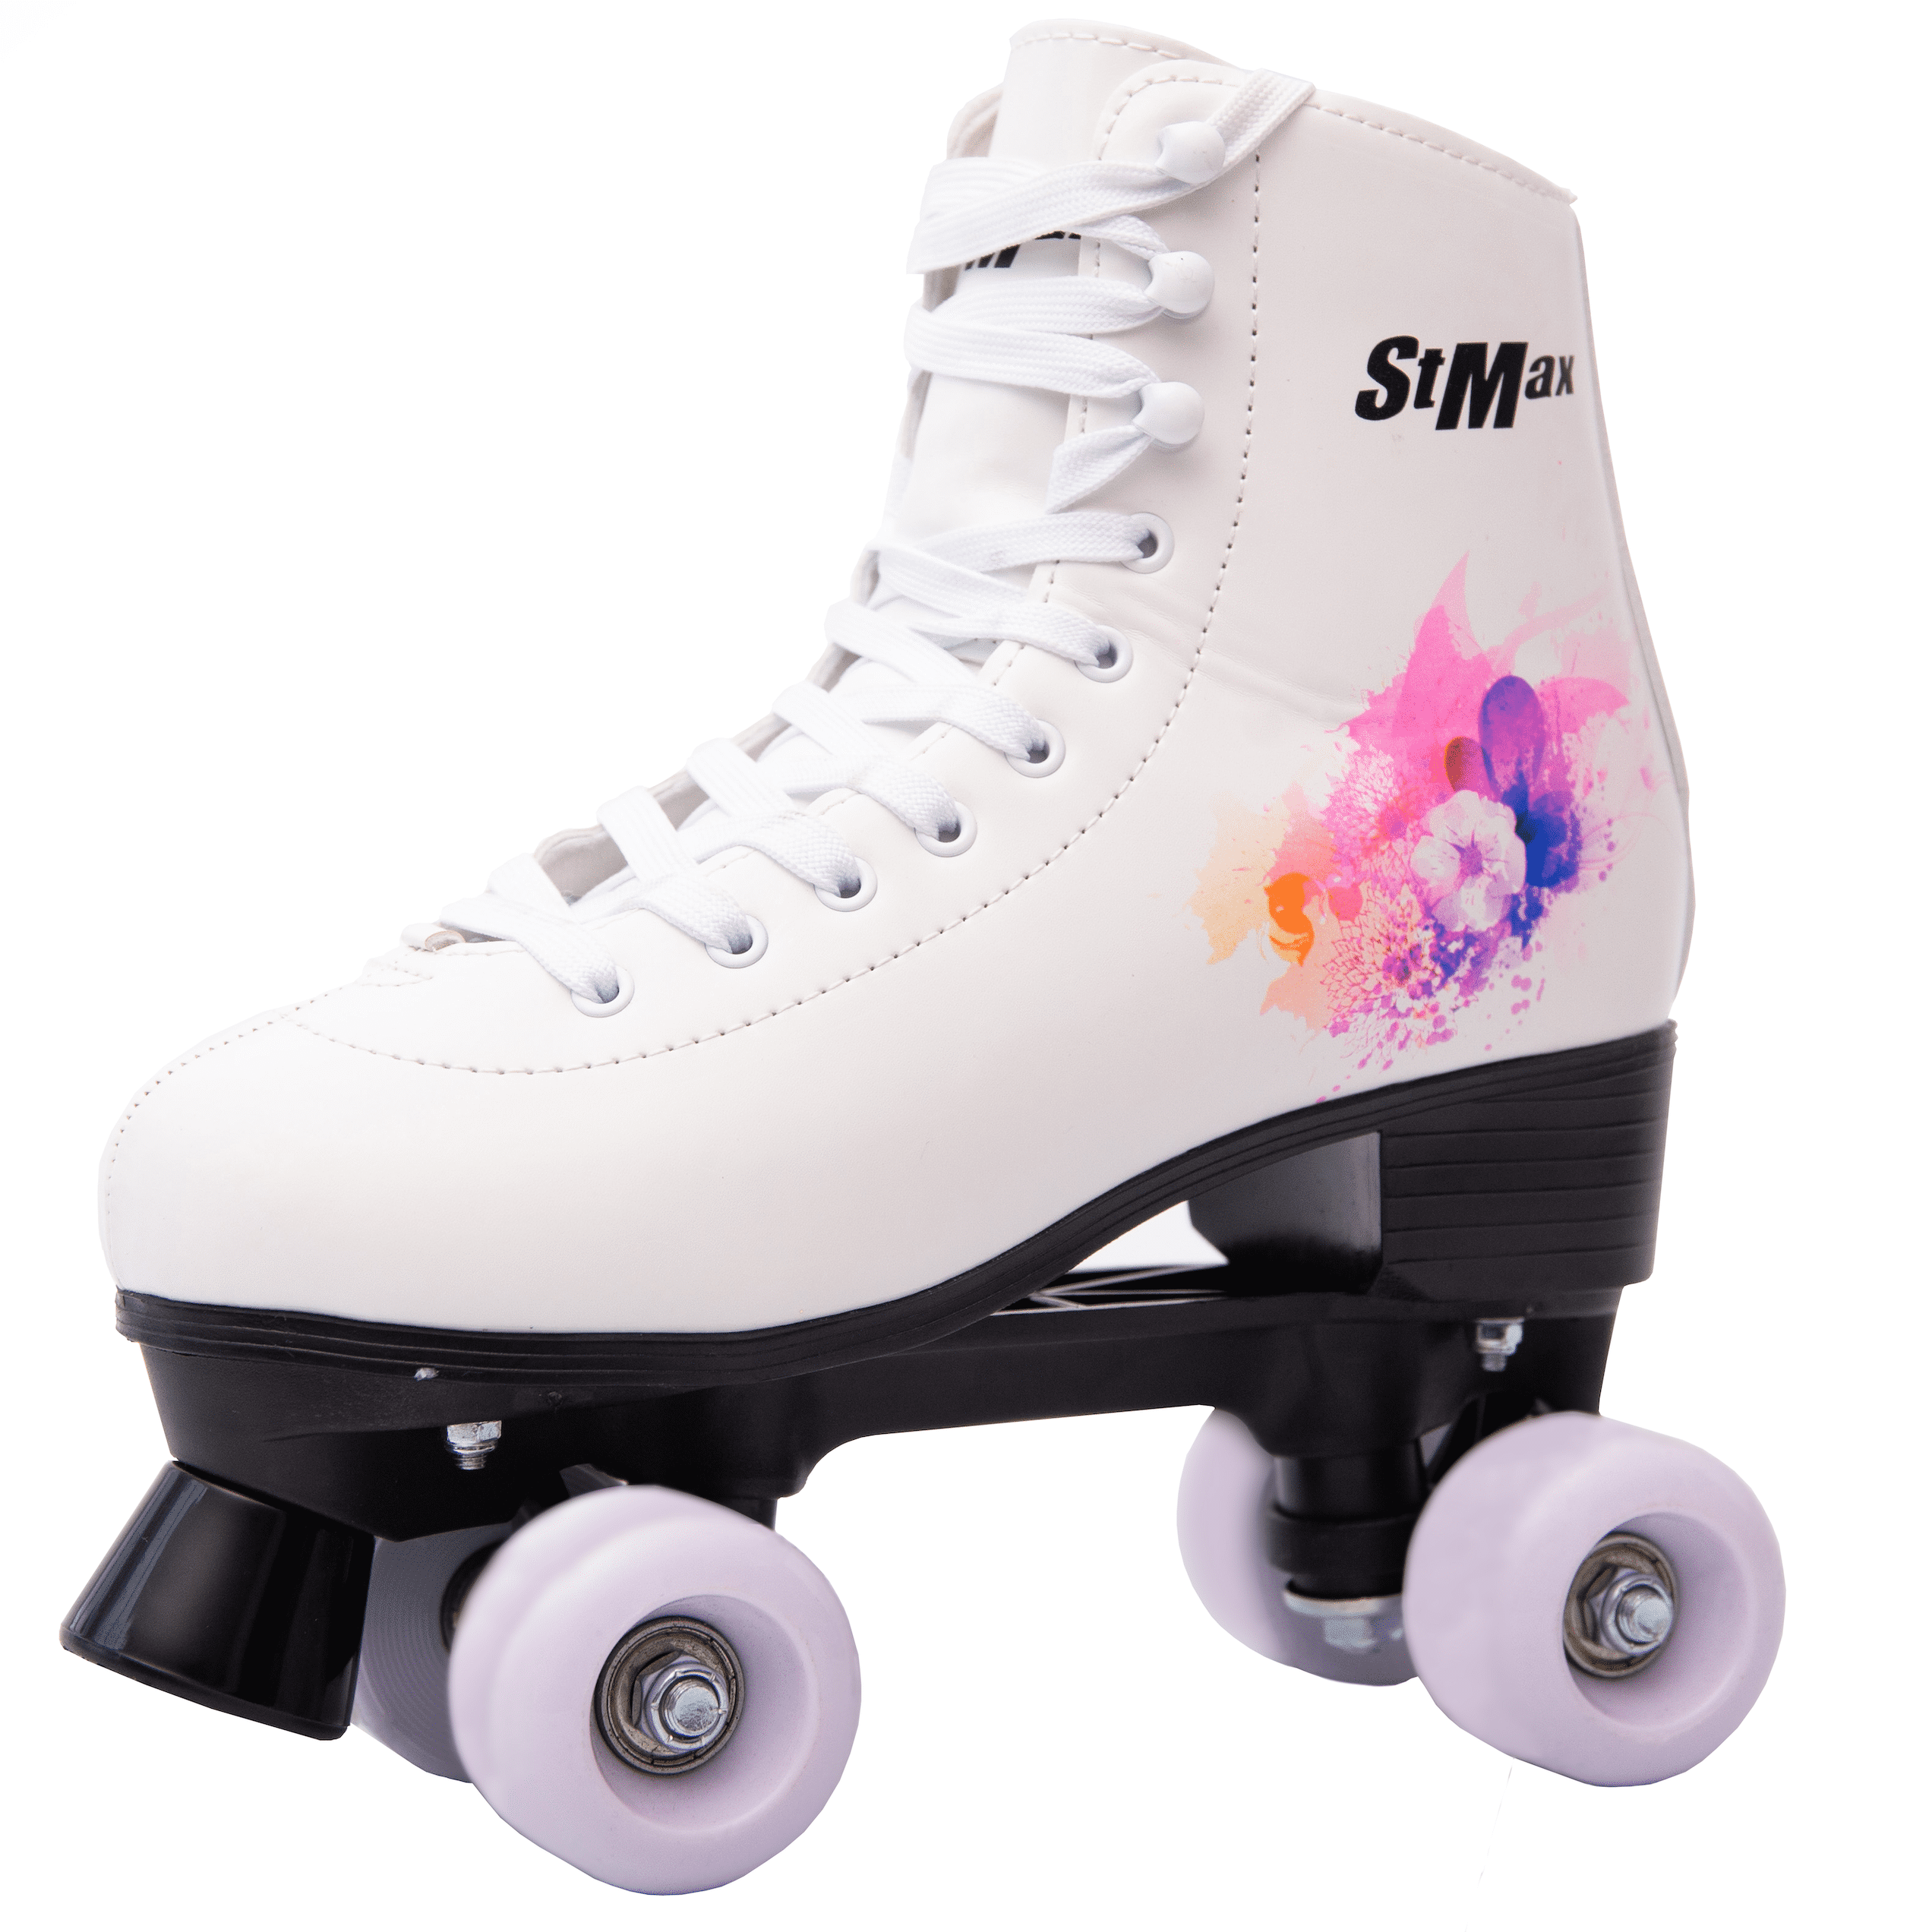 Stmax Quad Roller Skates for Girls  White and Purple size 3.5 Youth 4-Wheels 